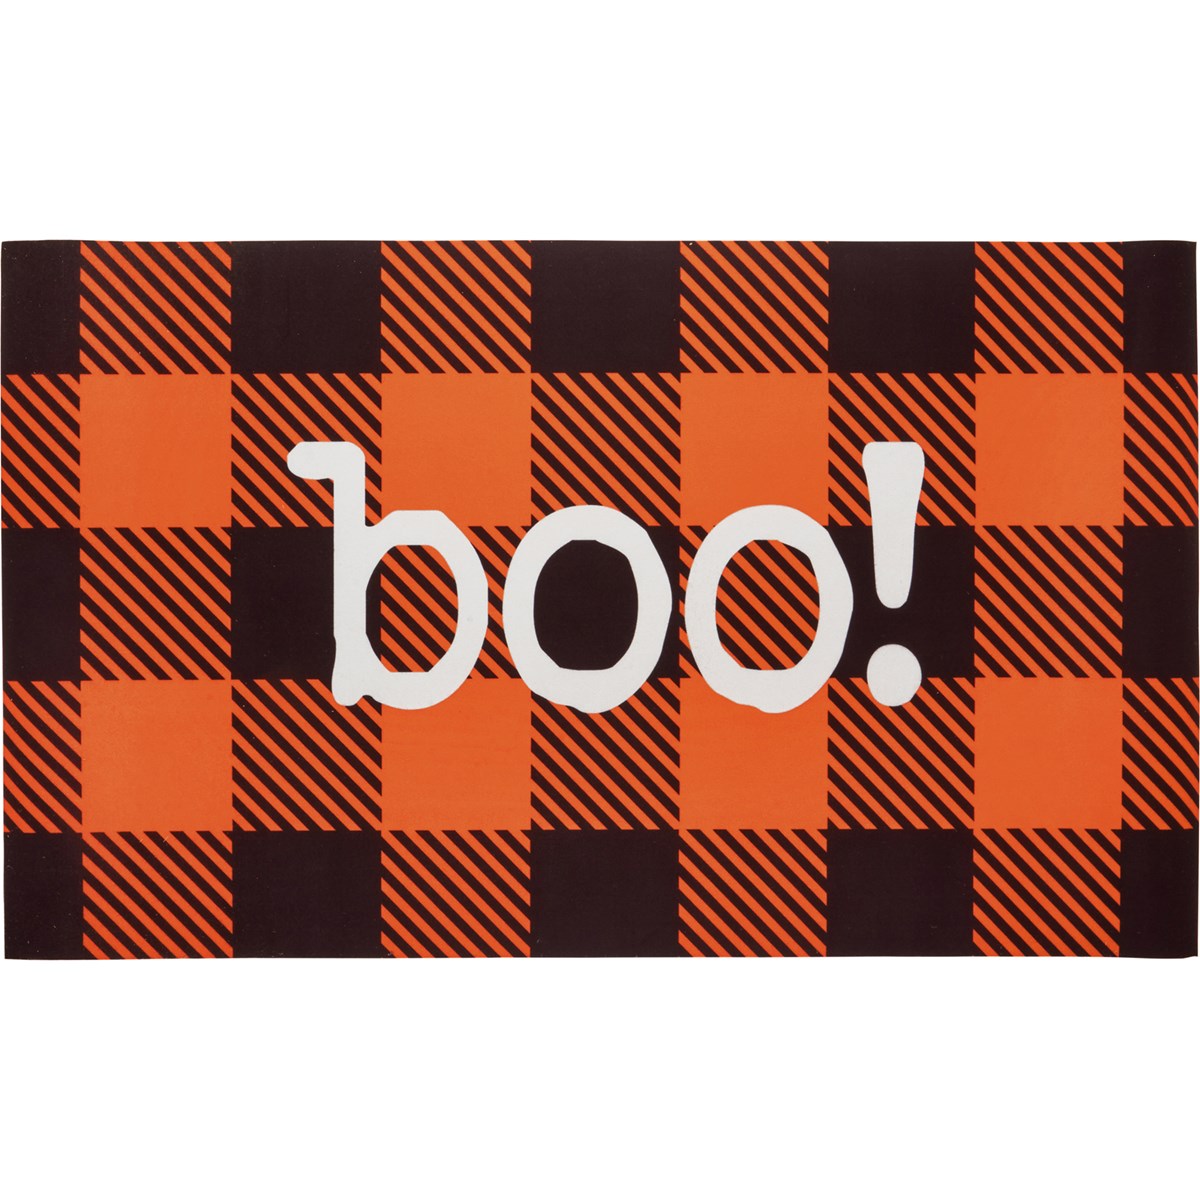 Boo Rug - Polyester, PVC skid-resistant backing